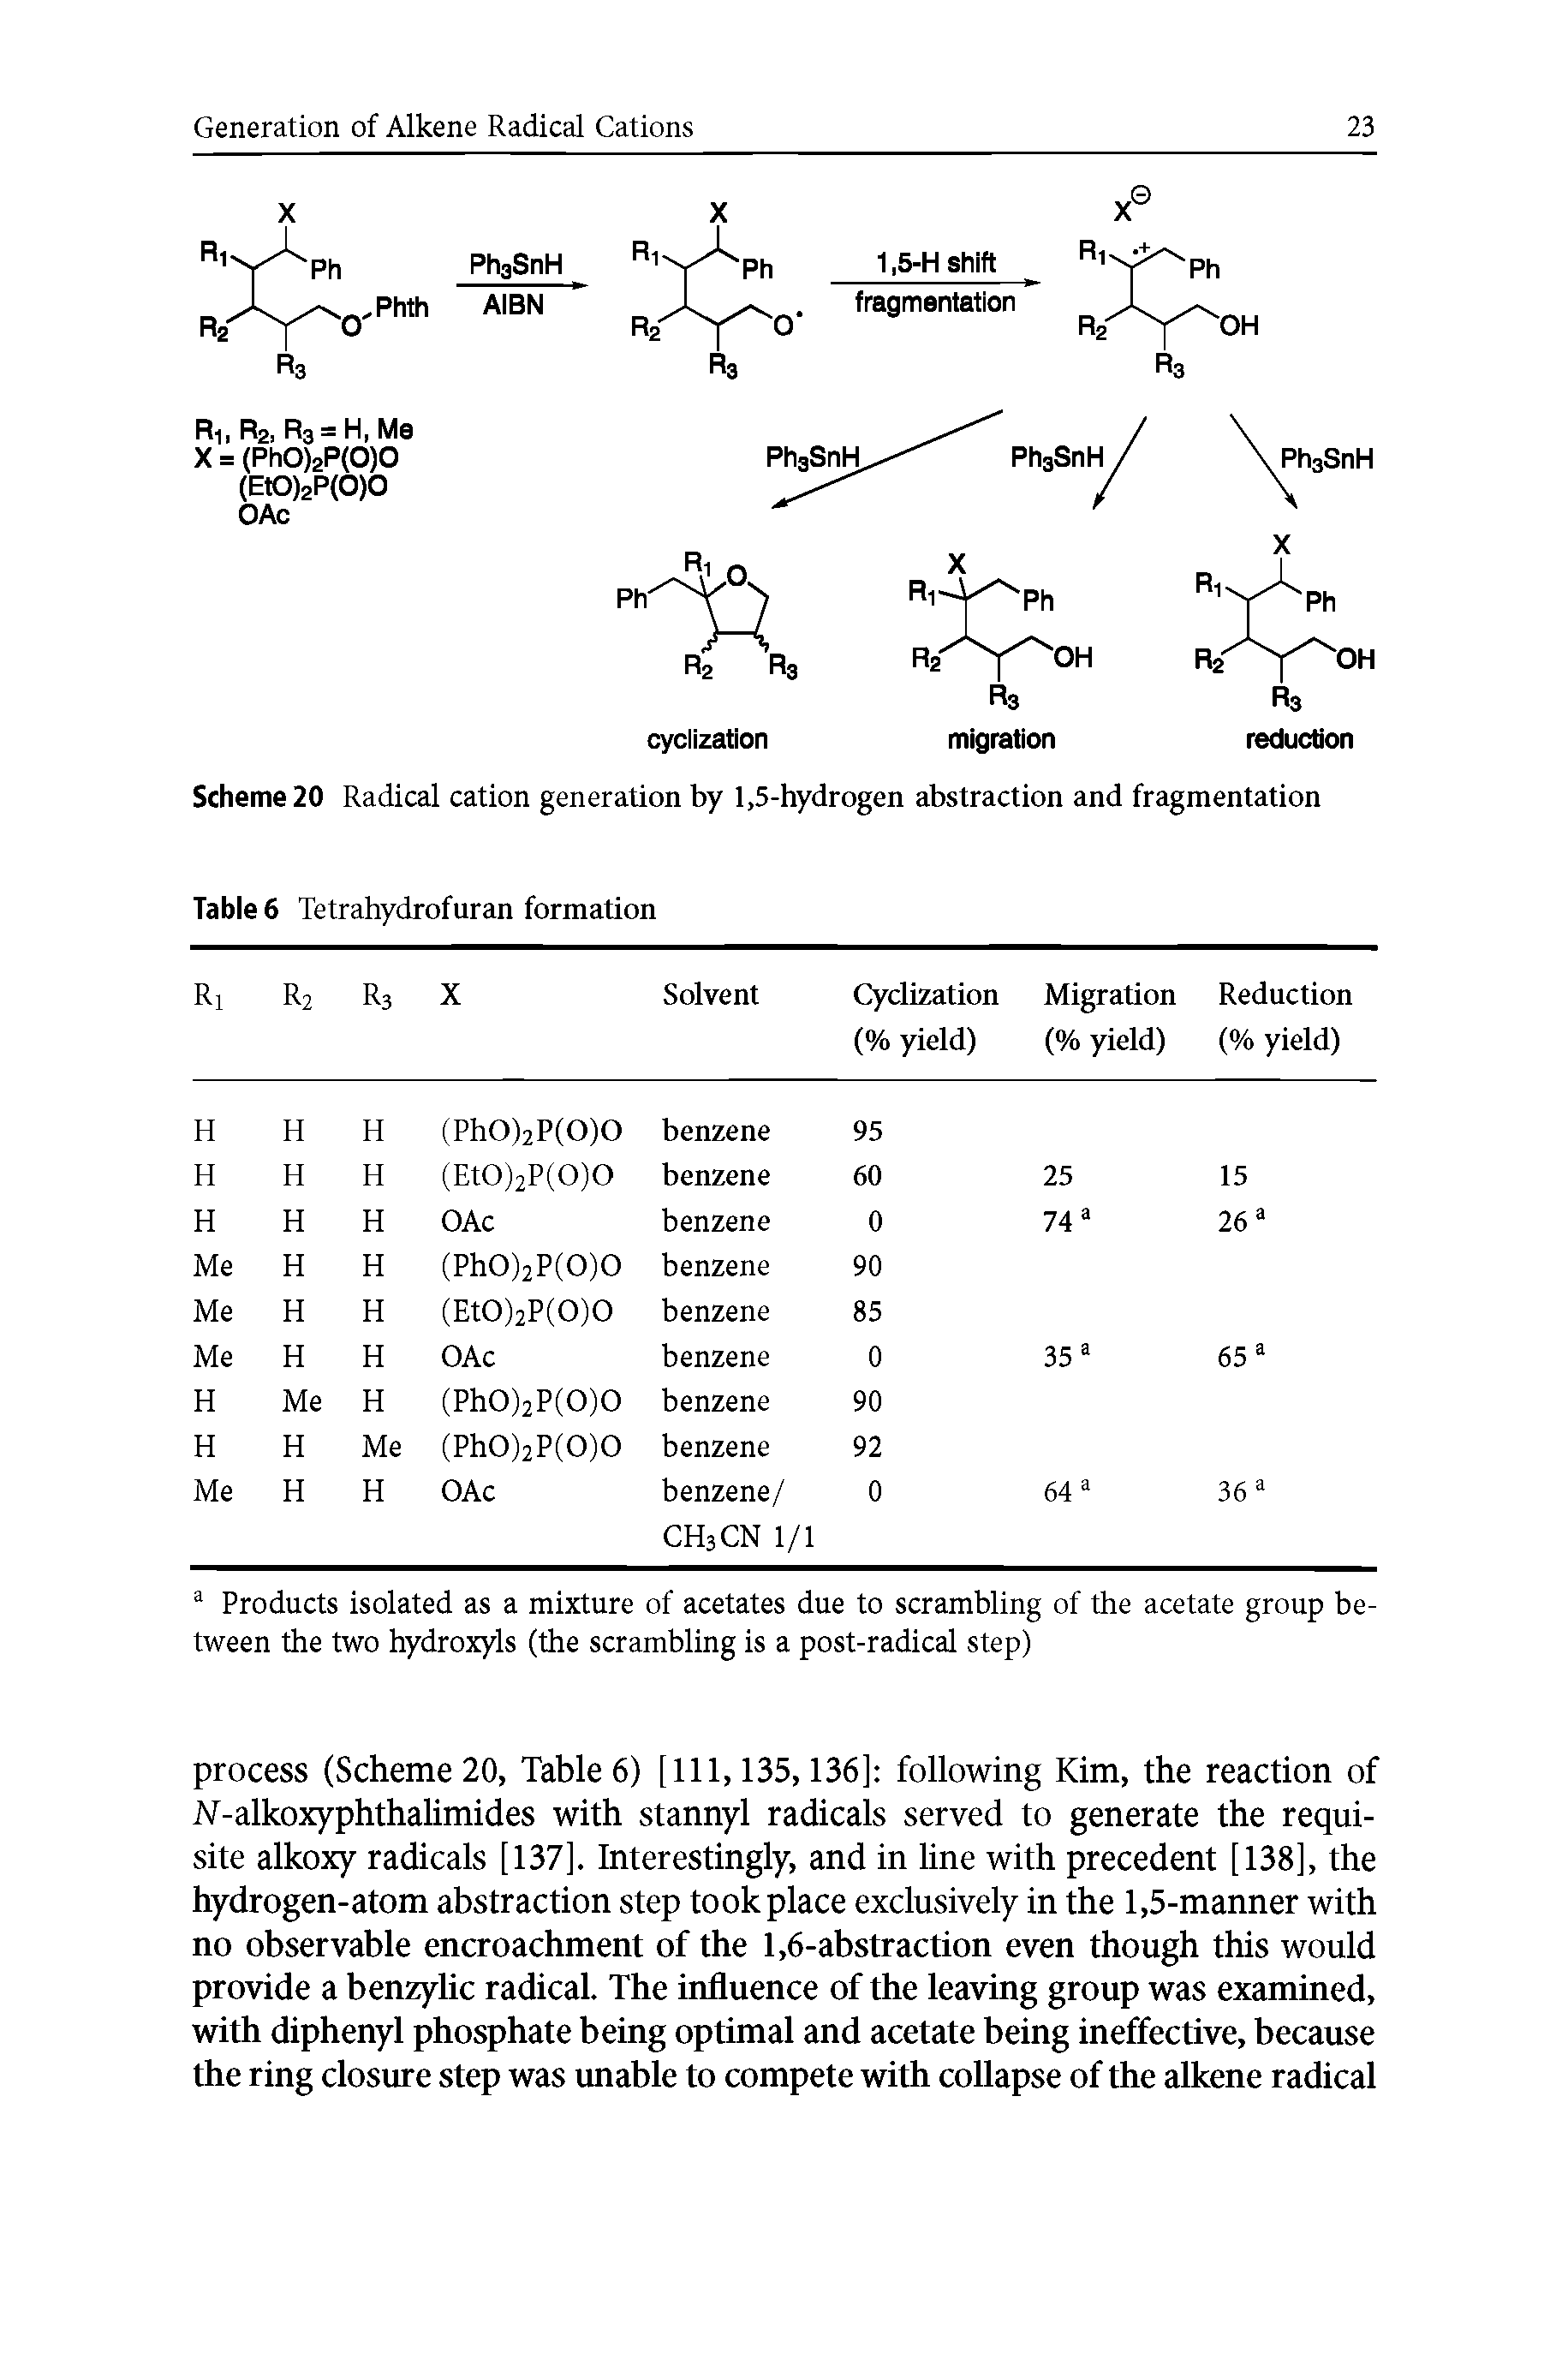 Scheme 20 Radical cation generation by 1,5-hydrogen abstraction and fragmentation...